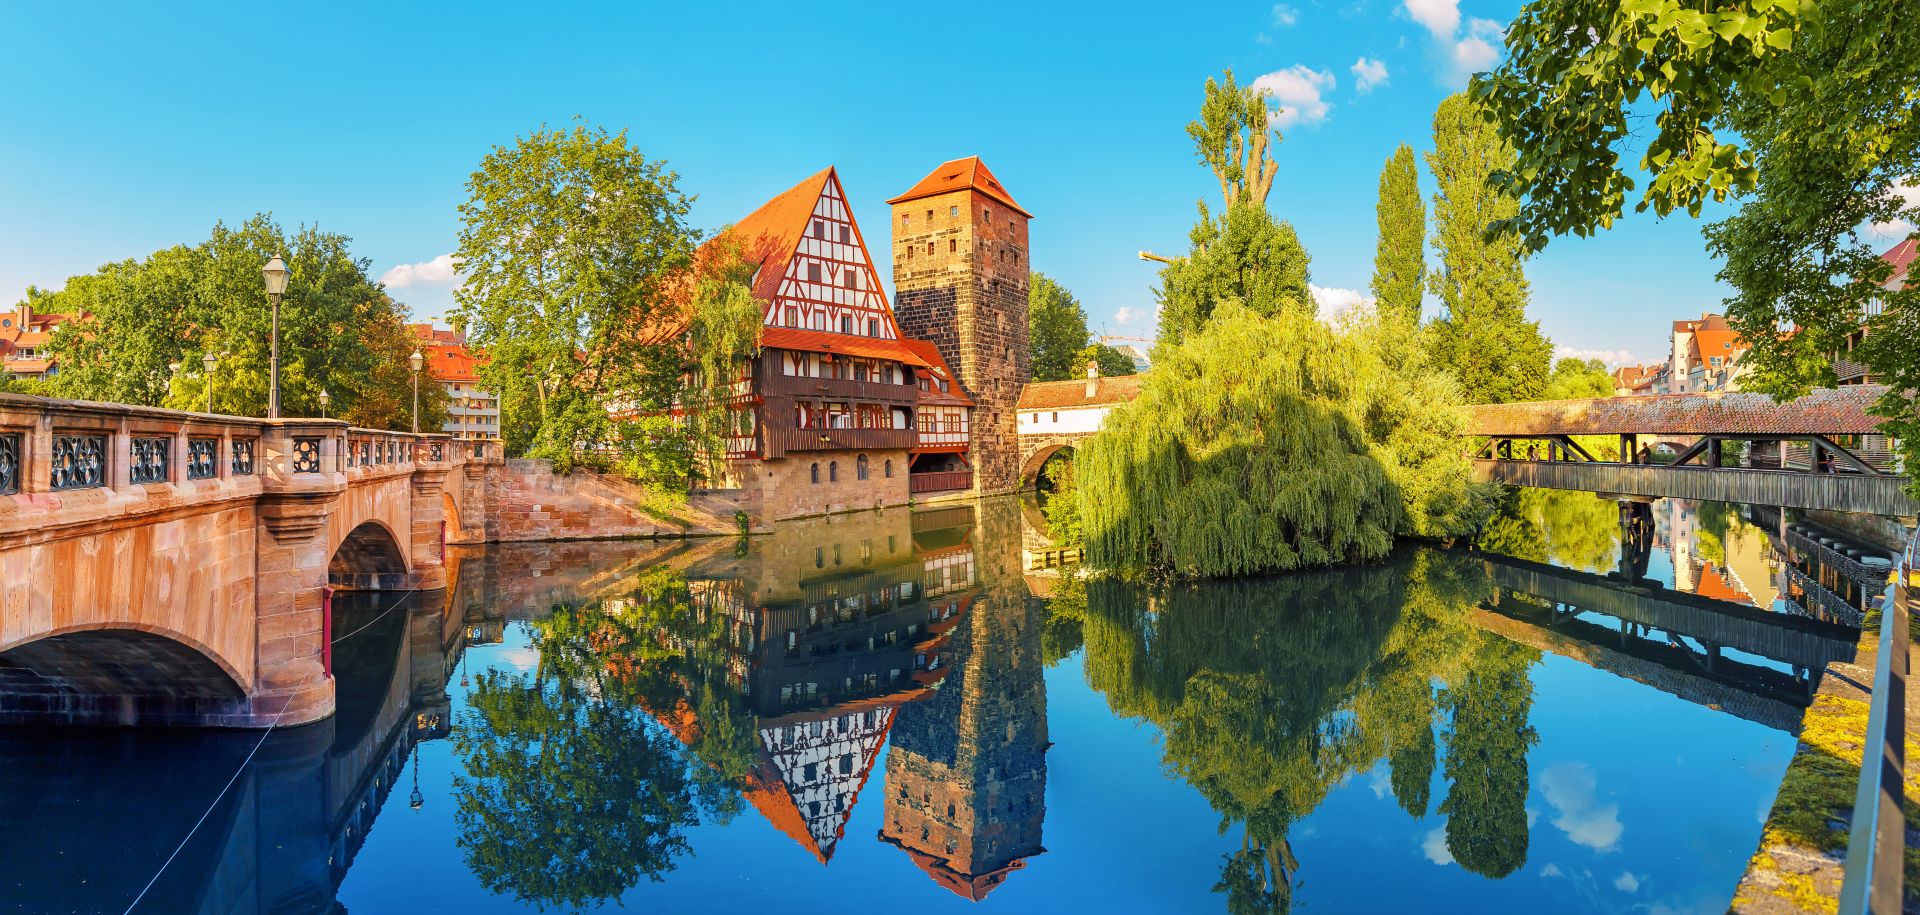 old half-timbered houses on the banks of the river Pegnitz